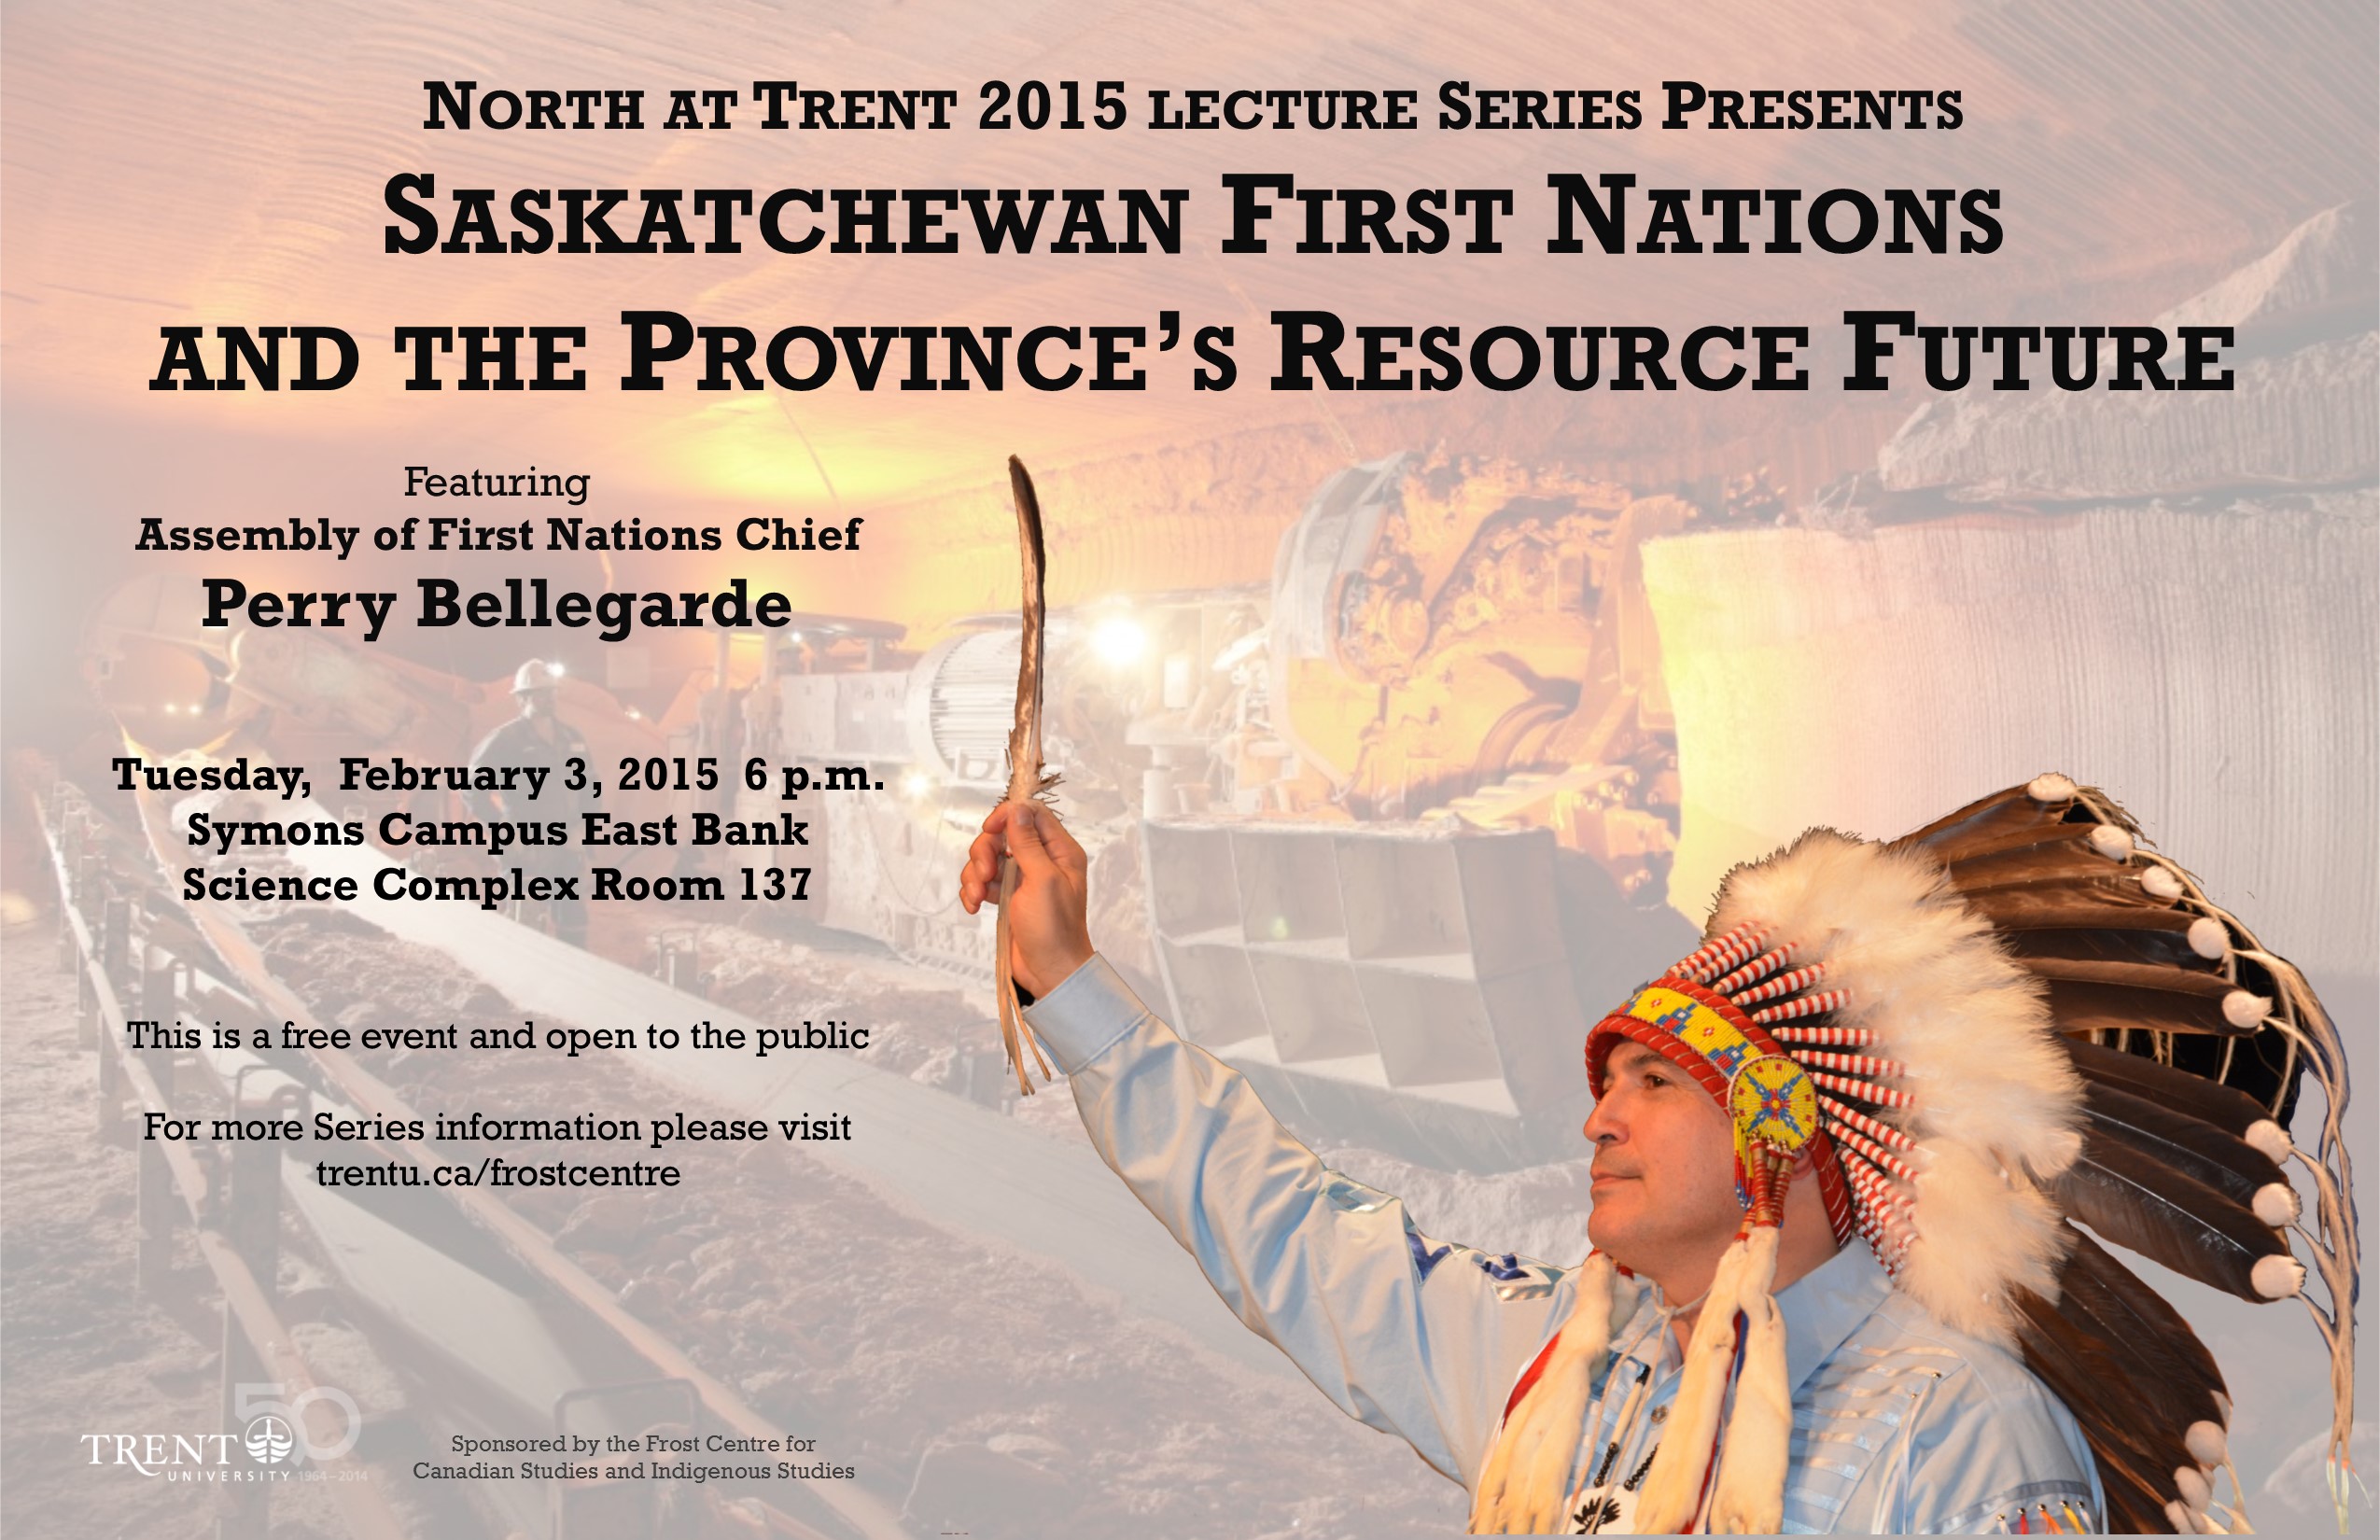 "Saskatchewan First Nations and the Province's Resource Future" with Perry Bellegarde February 3, 2015